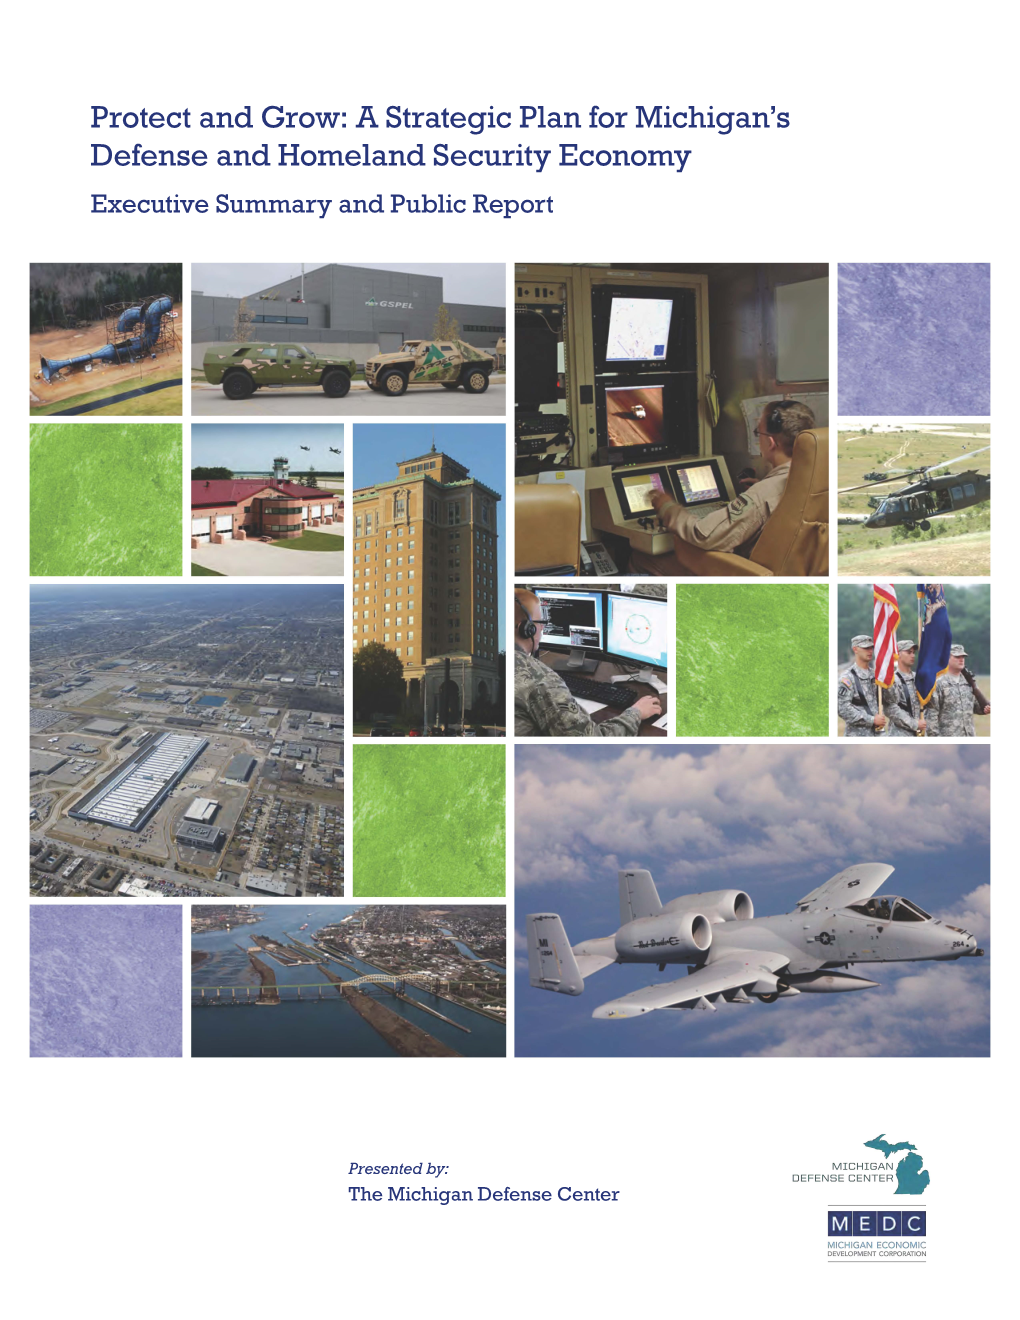 Protect and Grow: a Strategic Plan for Michigan's Defense and Homeland Security Economy